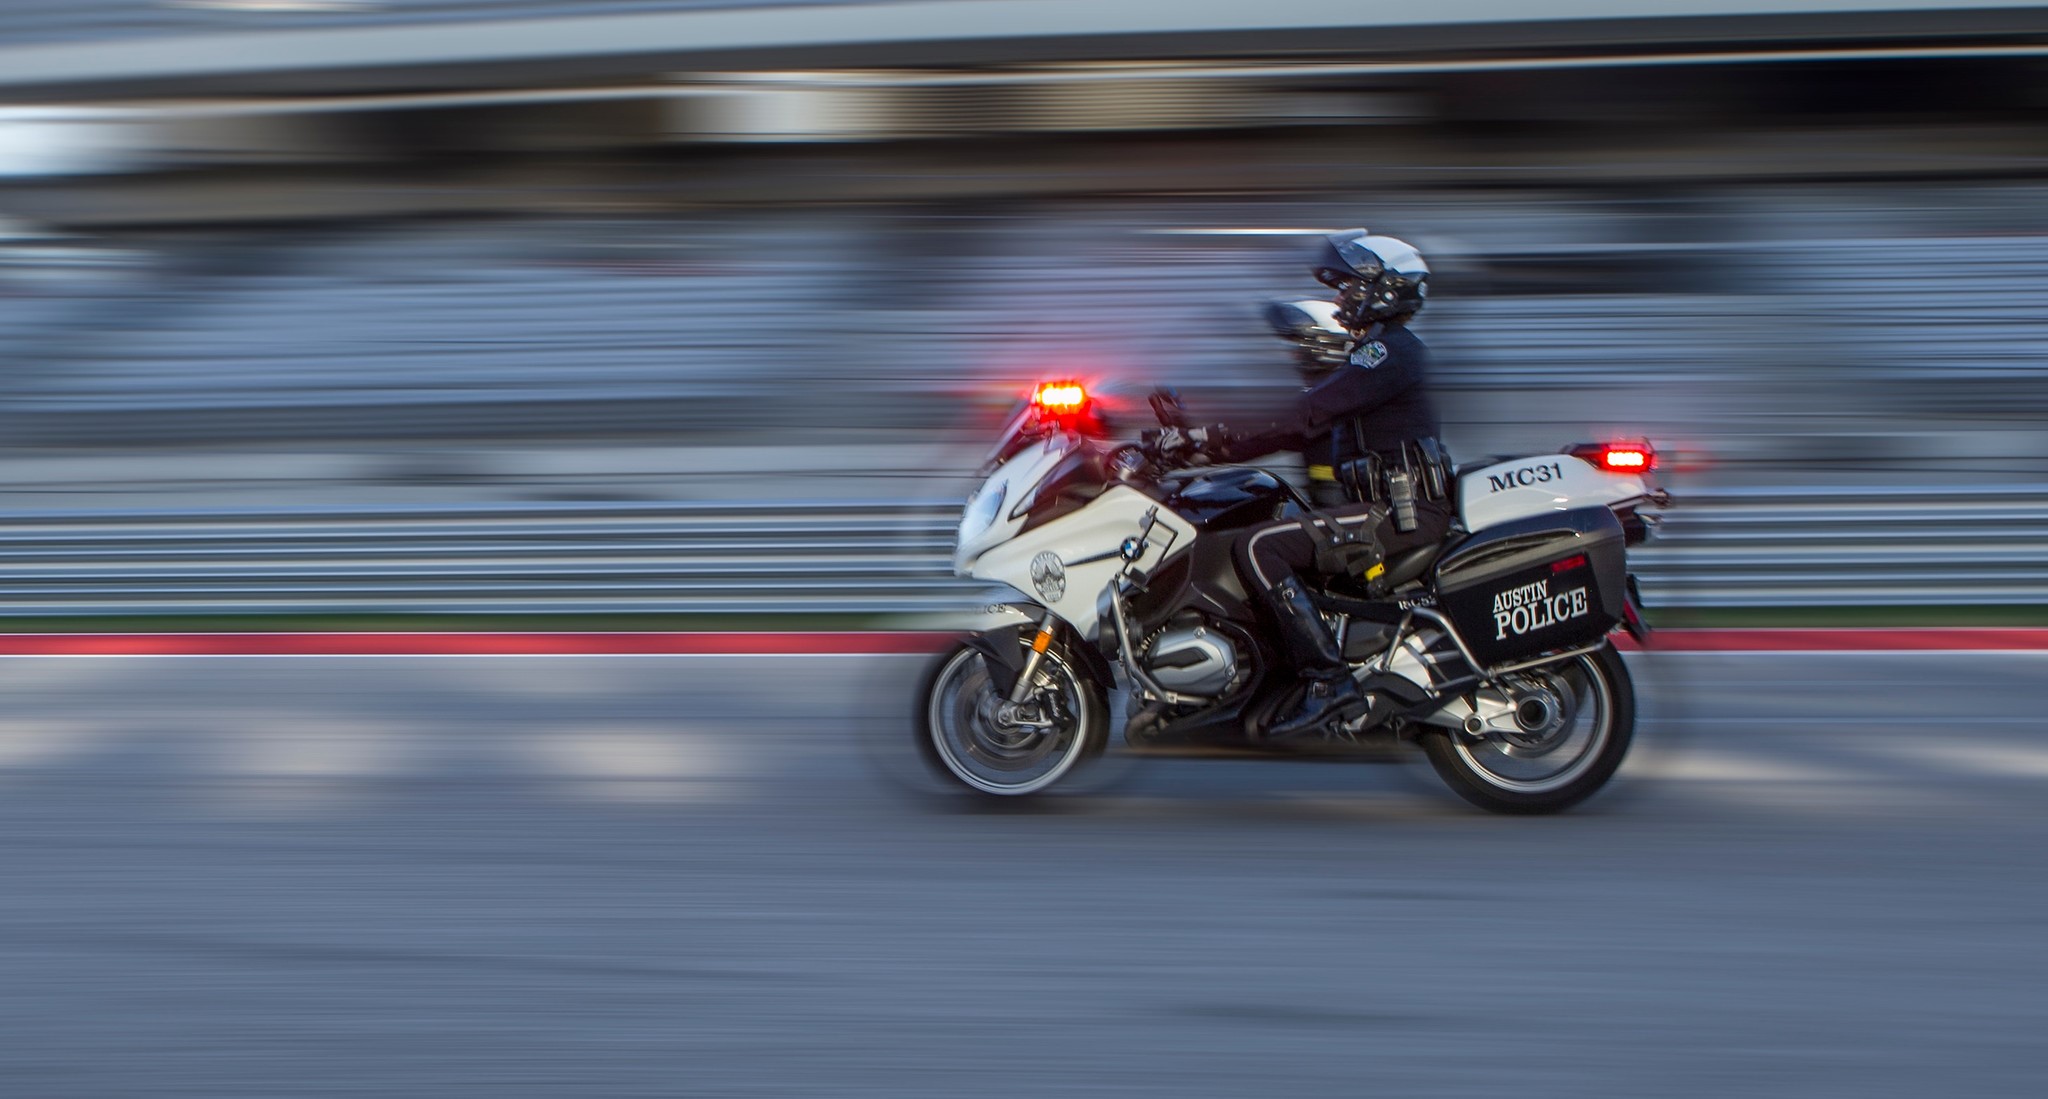 Image of a motorcycle cop driving down the road